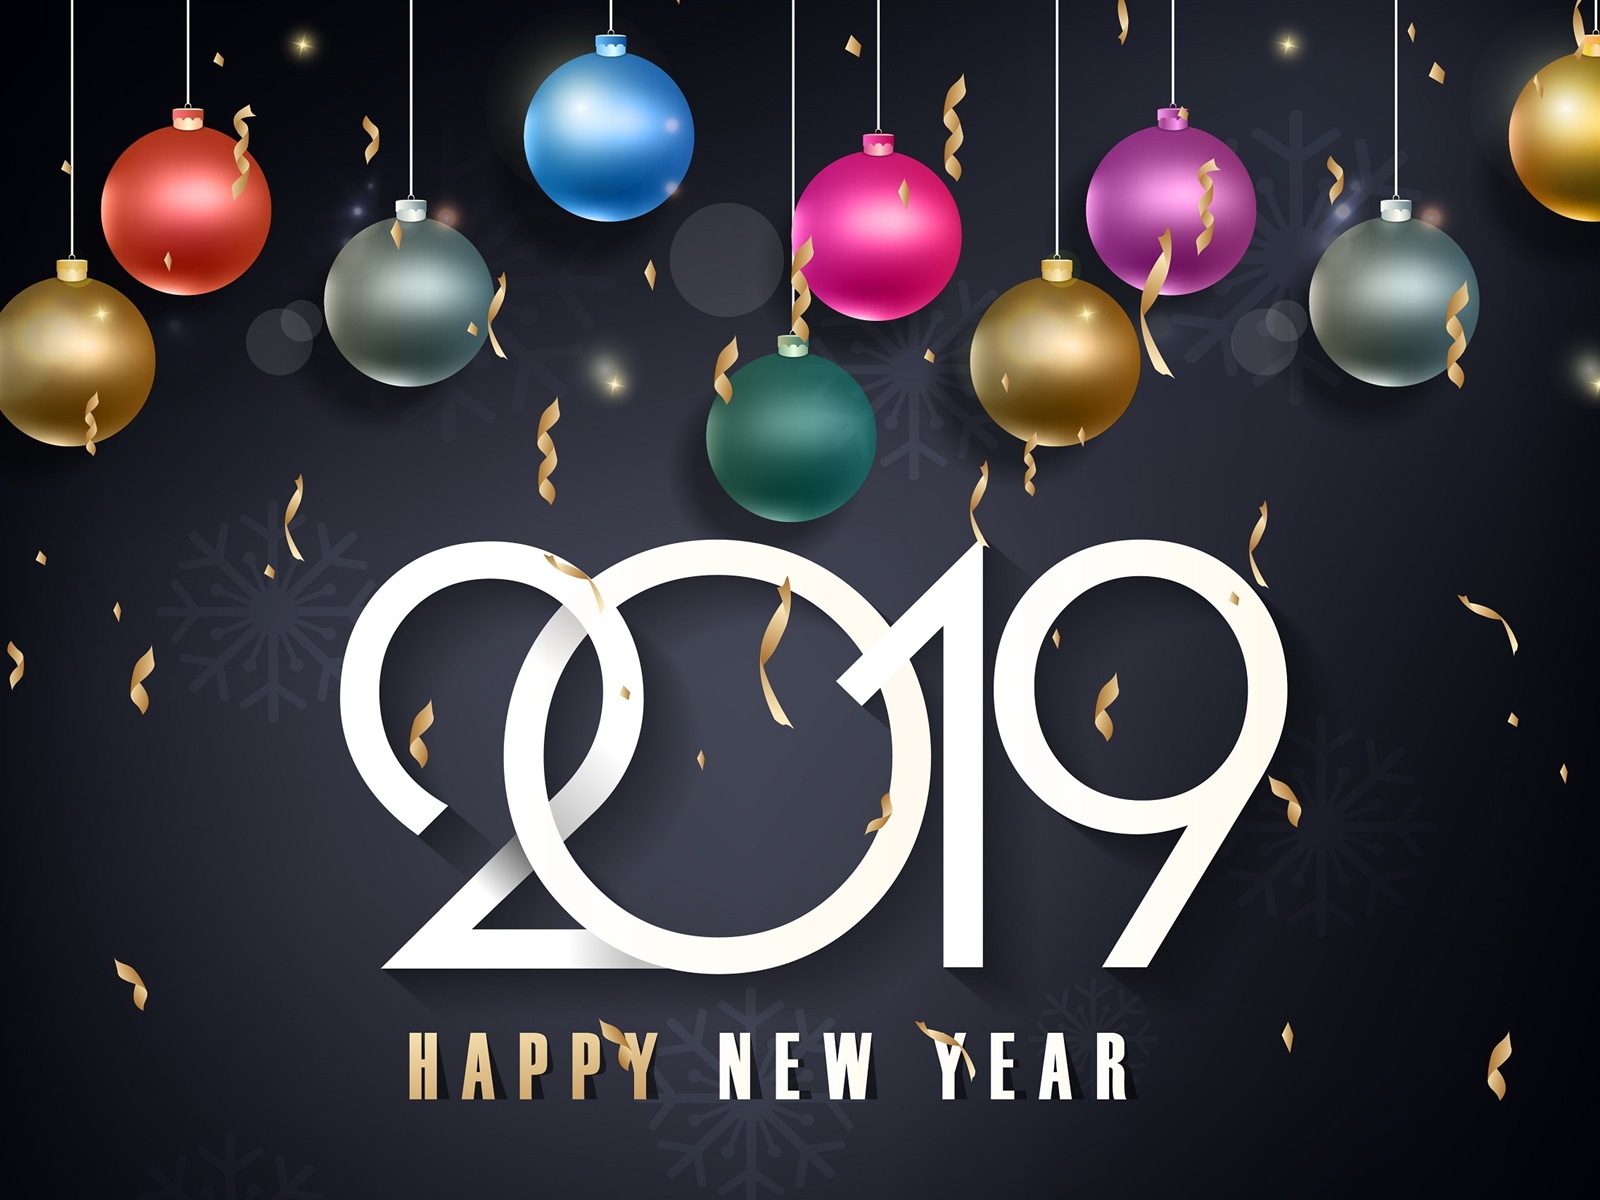 Happy New Year 2019 HD wallpapers #9 - 1600x1200